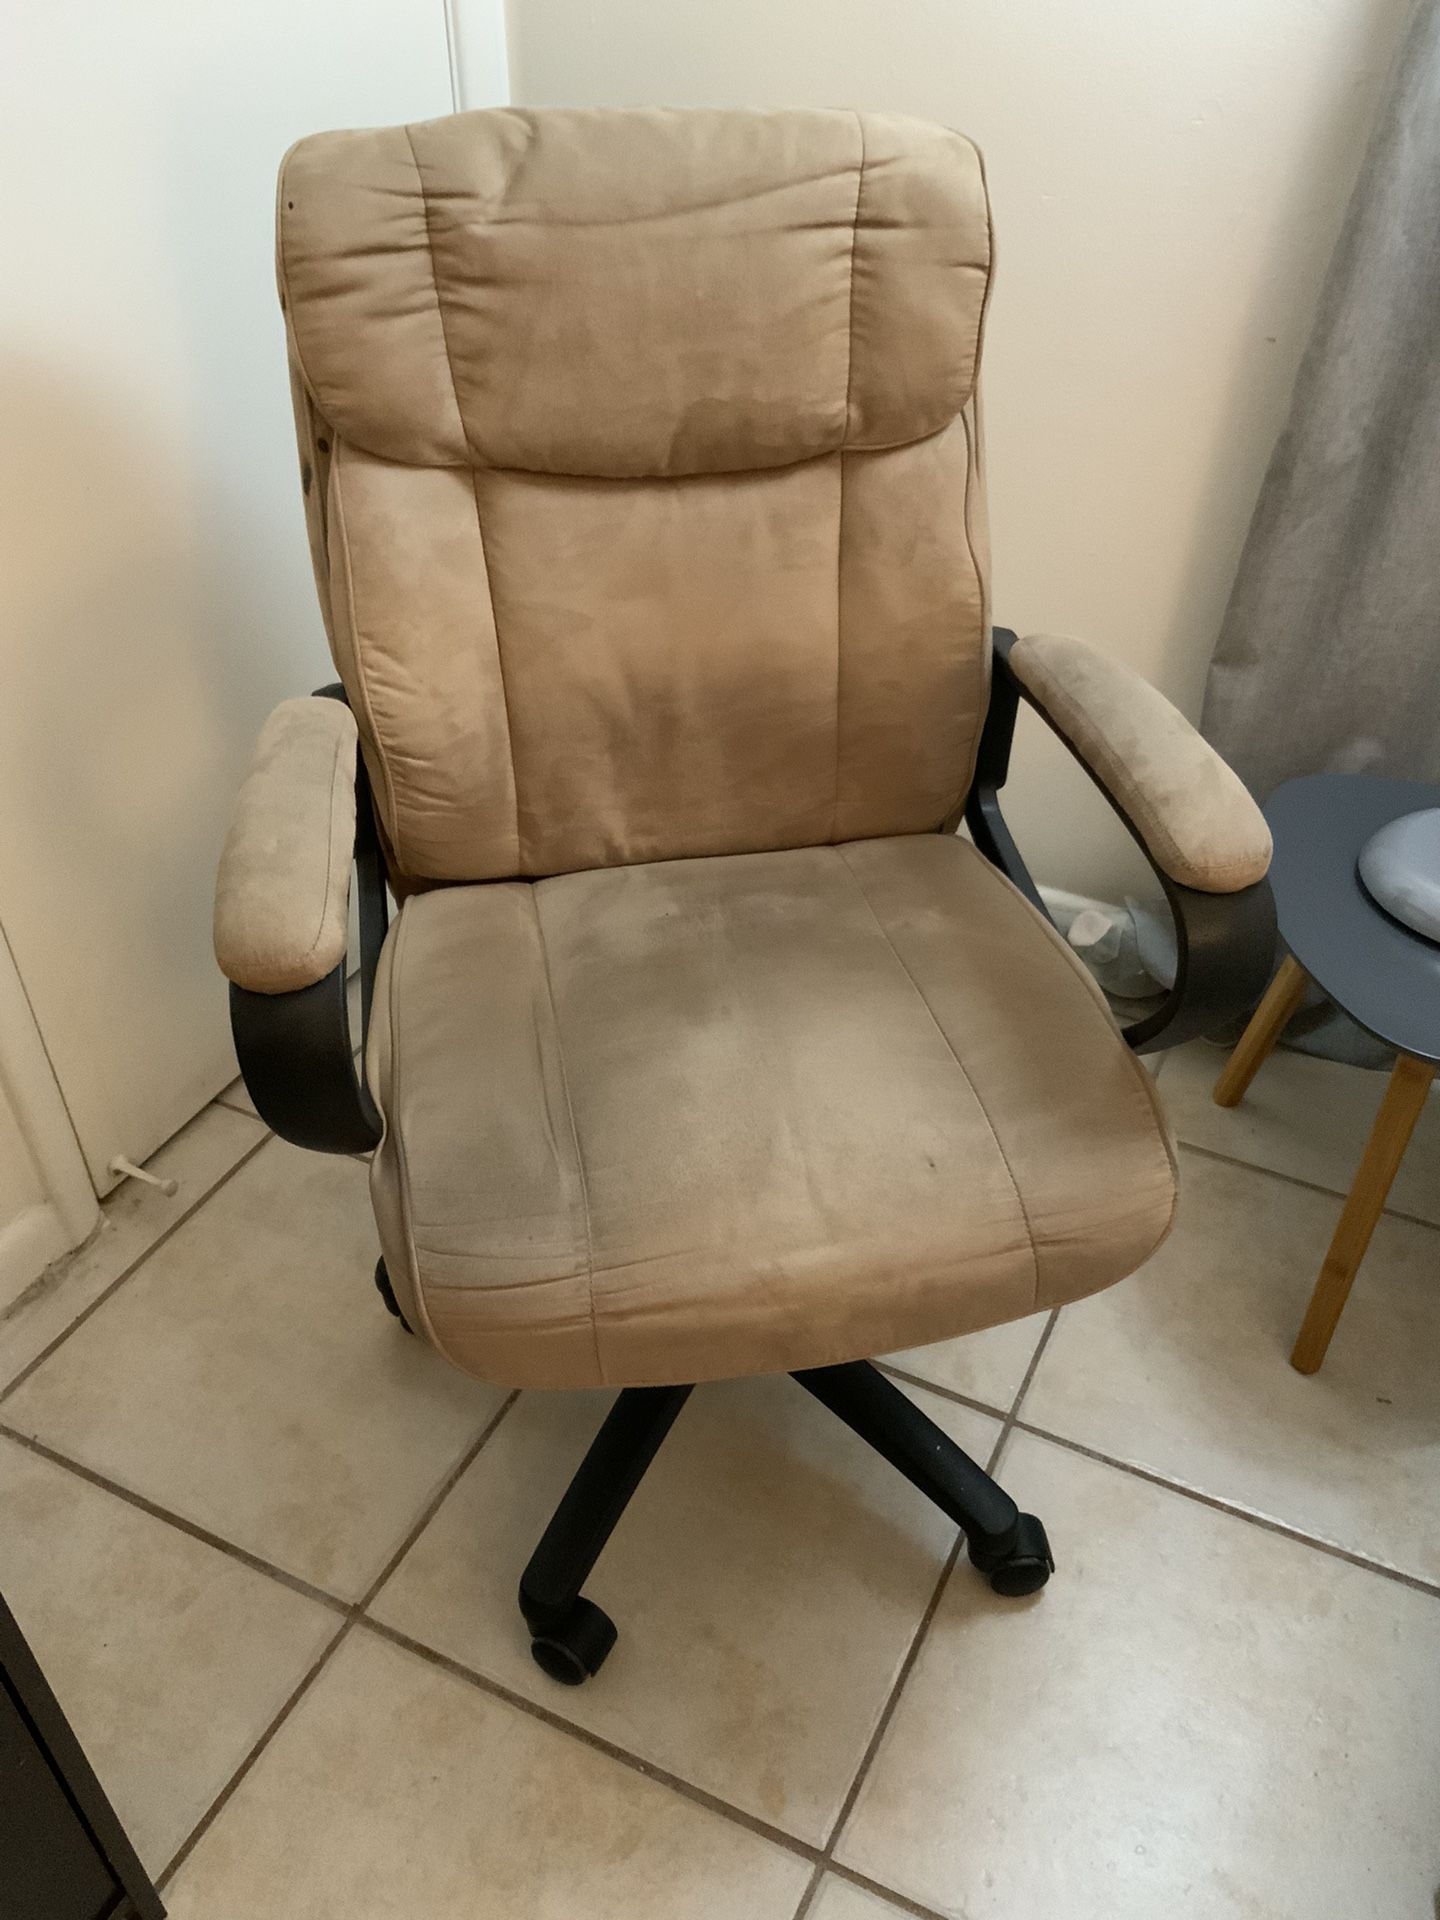 Comfy Office Chair - Adjustable Moves Up And Down To Adjust Height